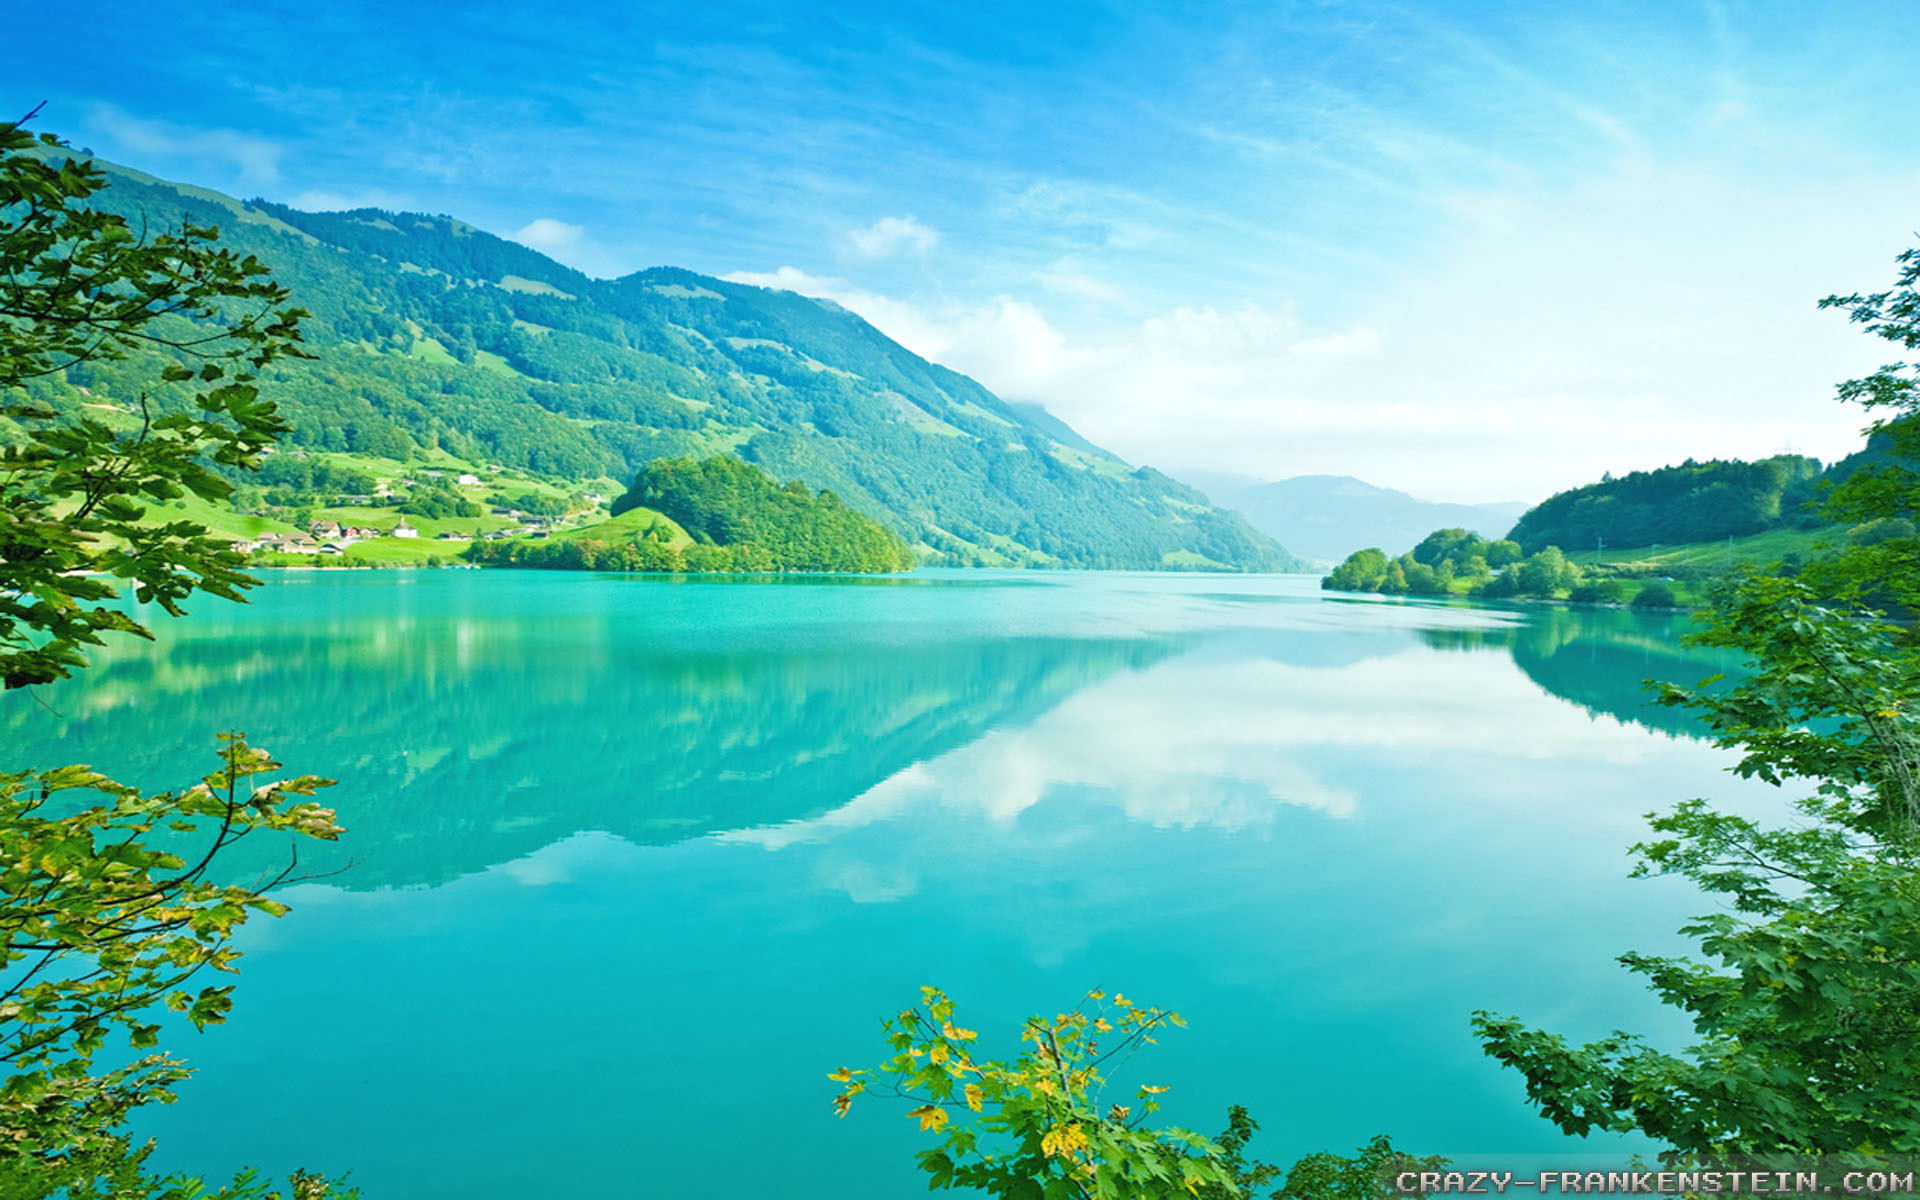 natural images hd wallpaper desktop background,water resources,natural landscape,nature,body of water,lake